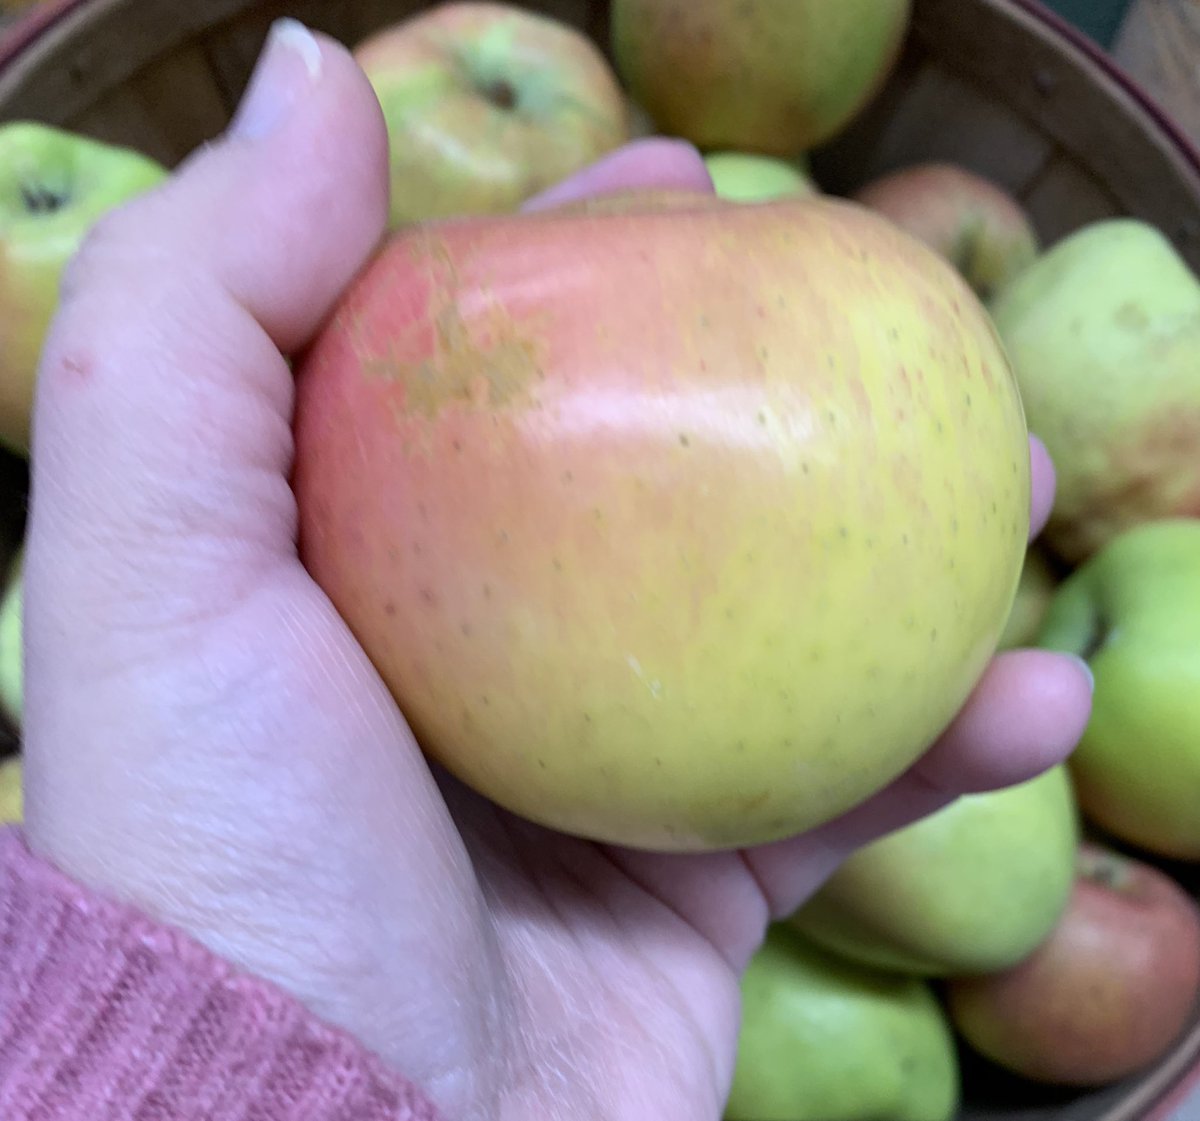 Newtown Pippin, pre-1750, Long Island NY. This one was a fave of George Washington and Ben Franklin; the oldest commercially grown apple in the US; imported to the UK and also highly favored by Queen Victoria! Cool story. Sadly, it’s an uggo, with tough BITTER AF skin  3/10